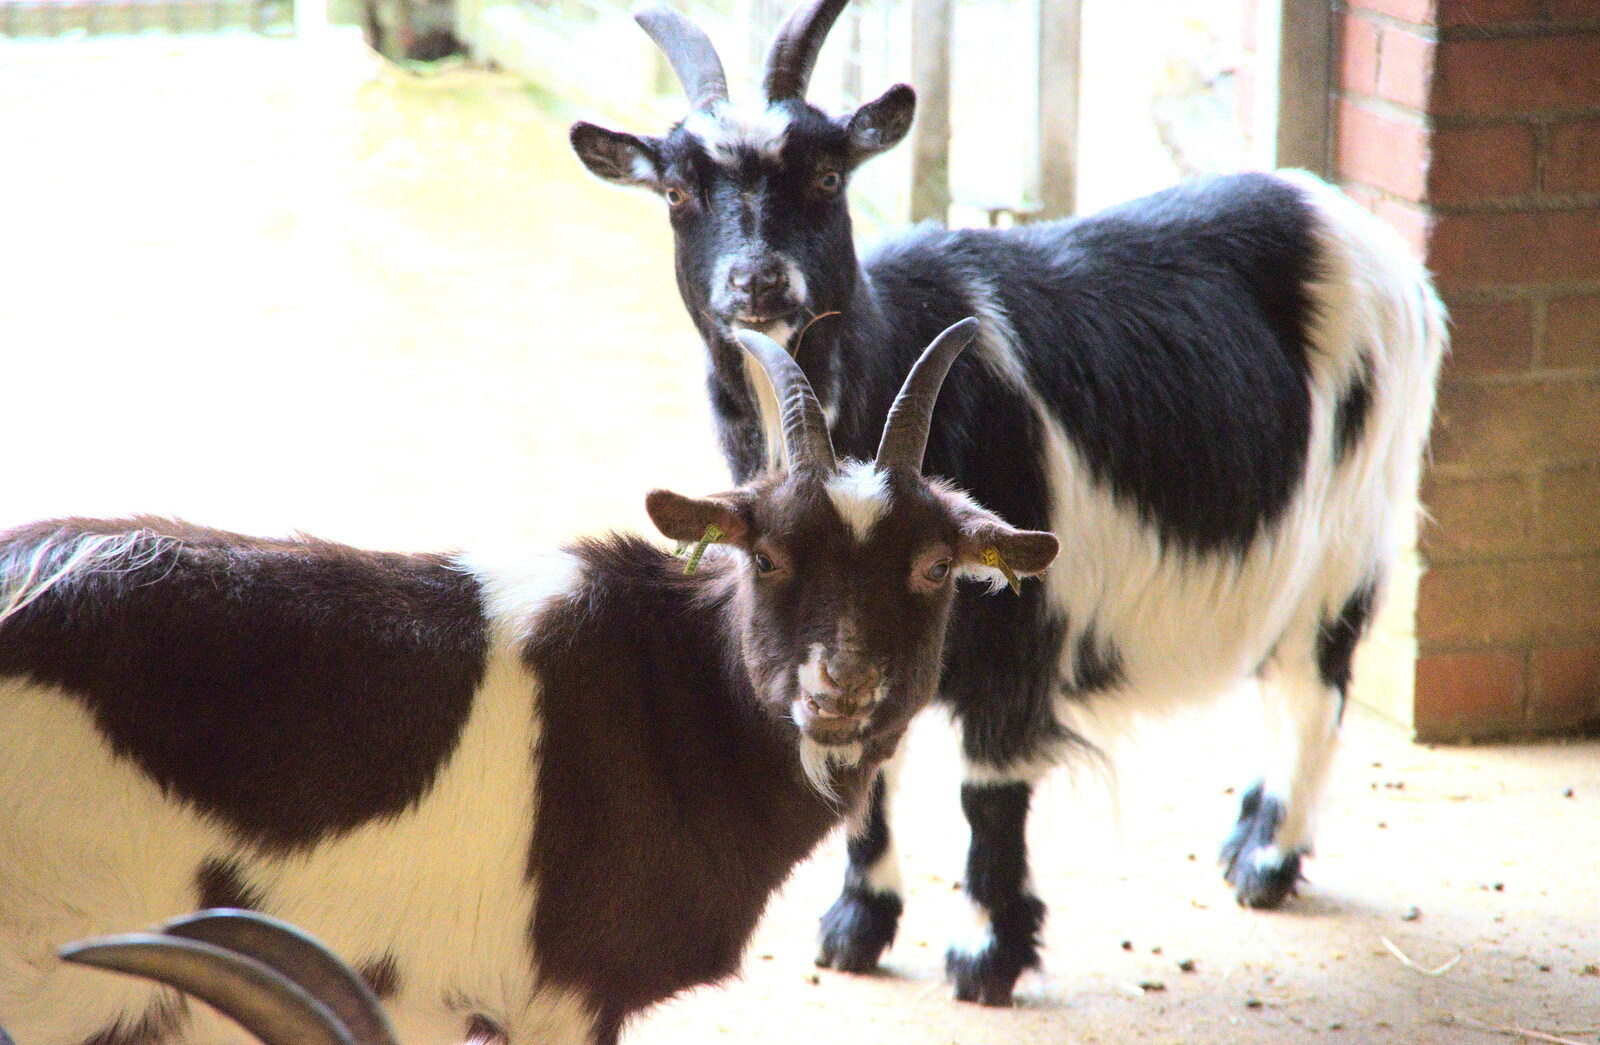 A Few Hours at the Zoo, Banham, Norfolk - 8th January 2023: A pair of goats